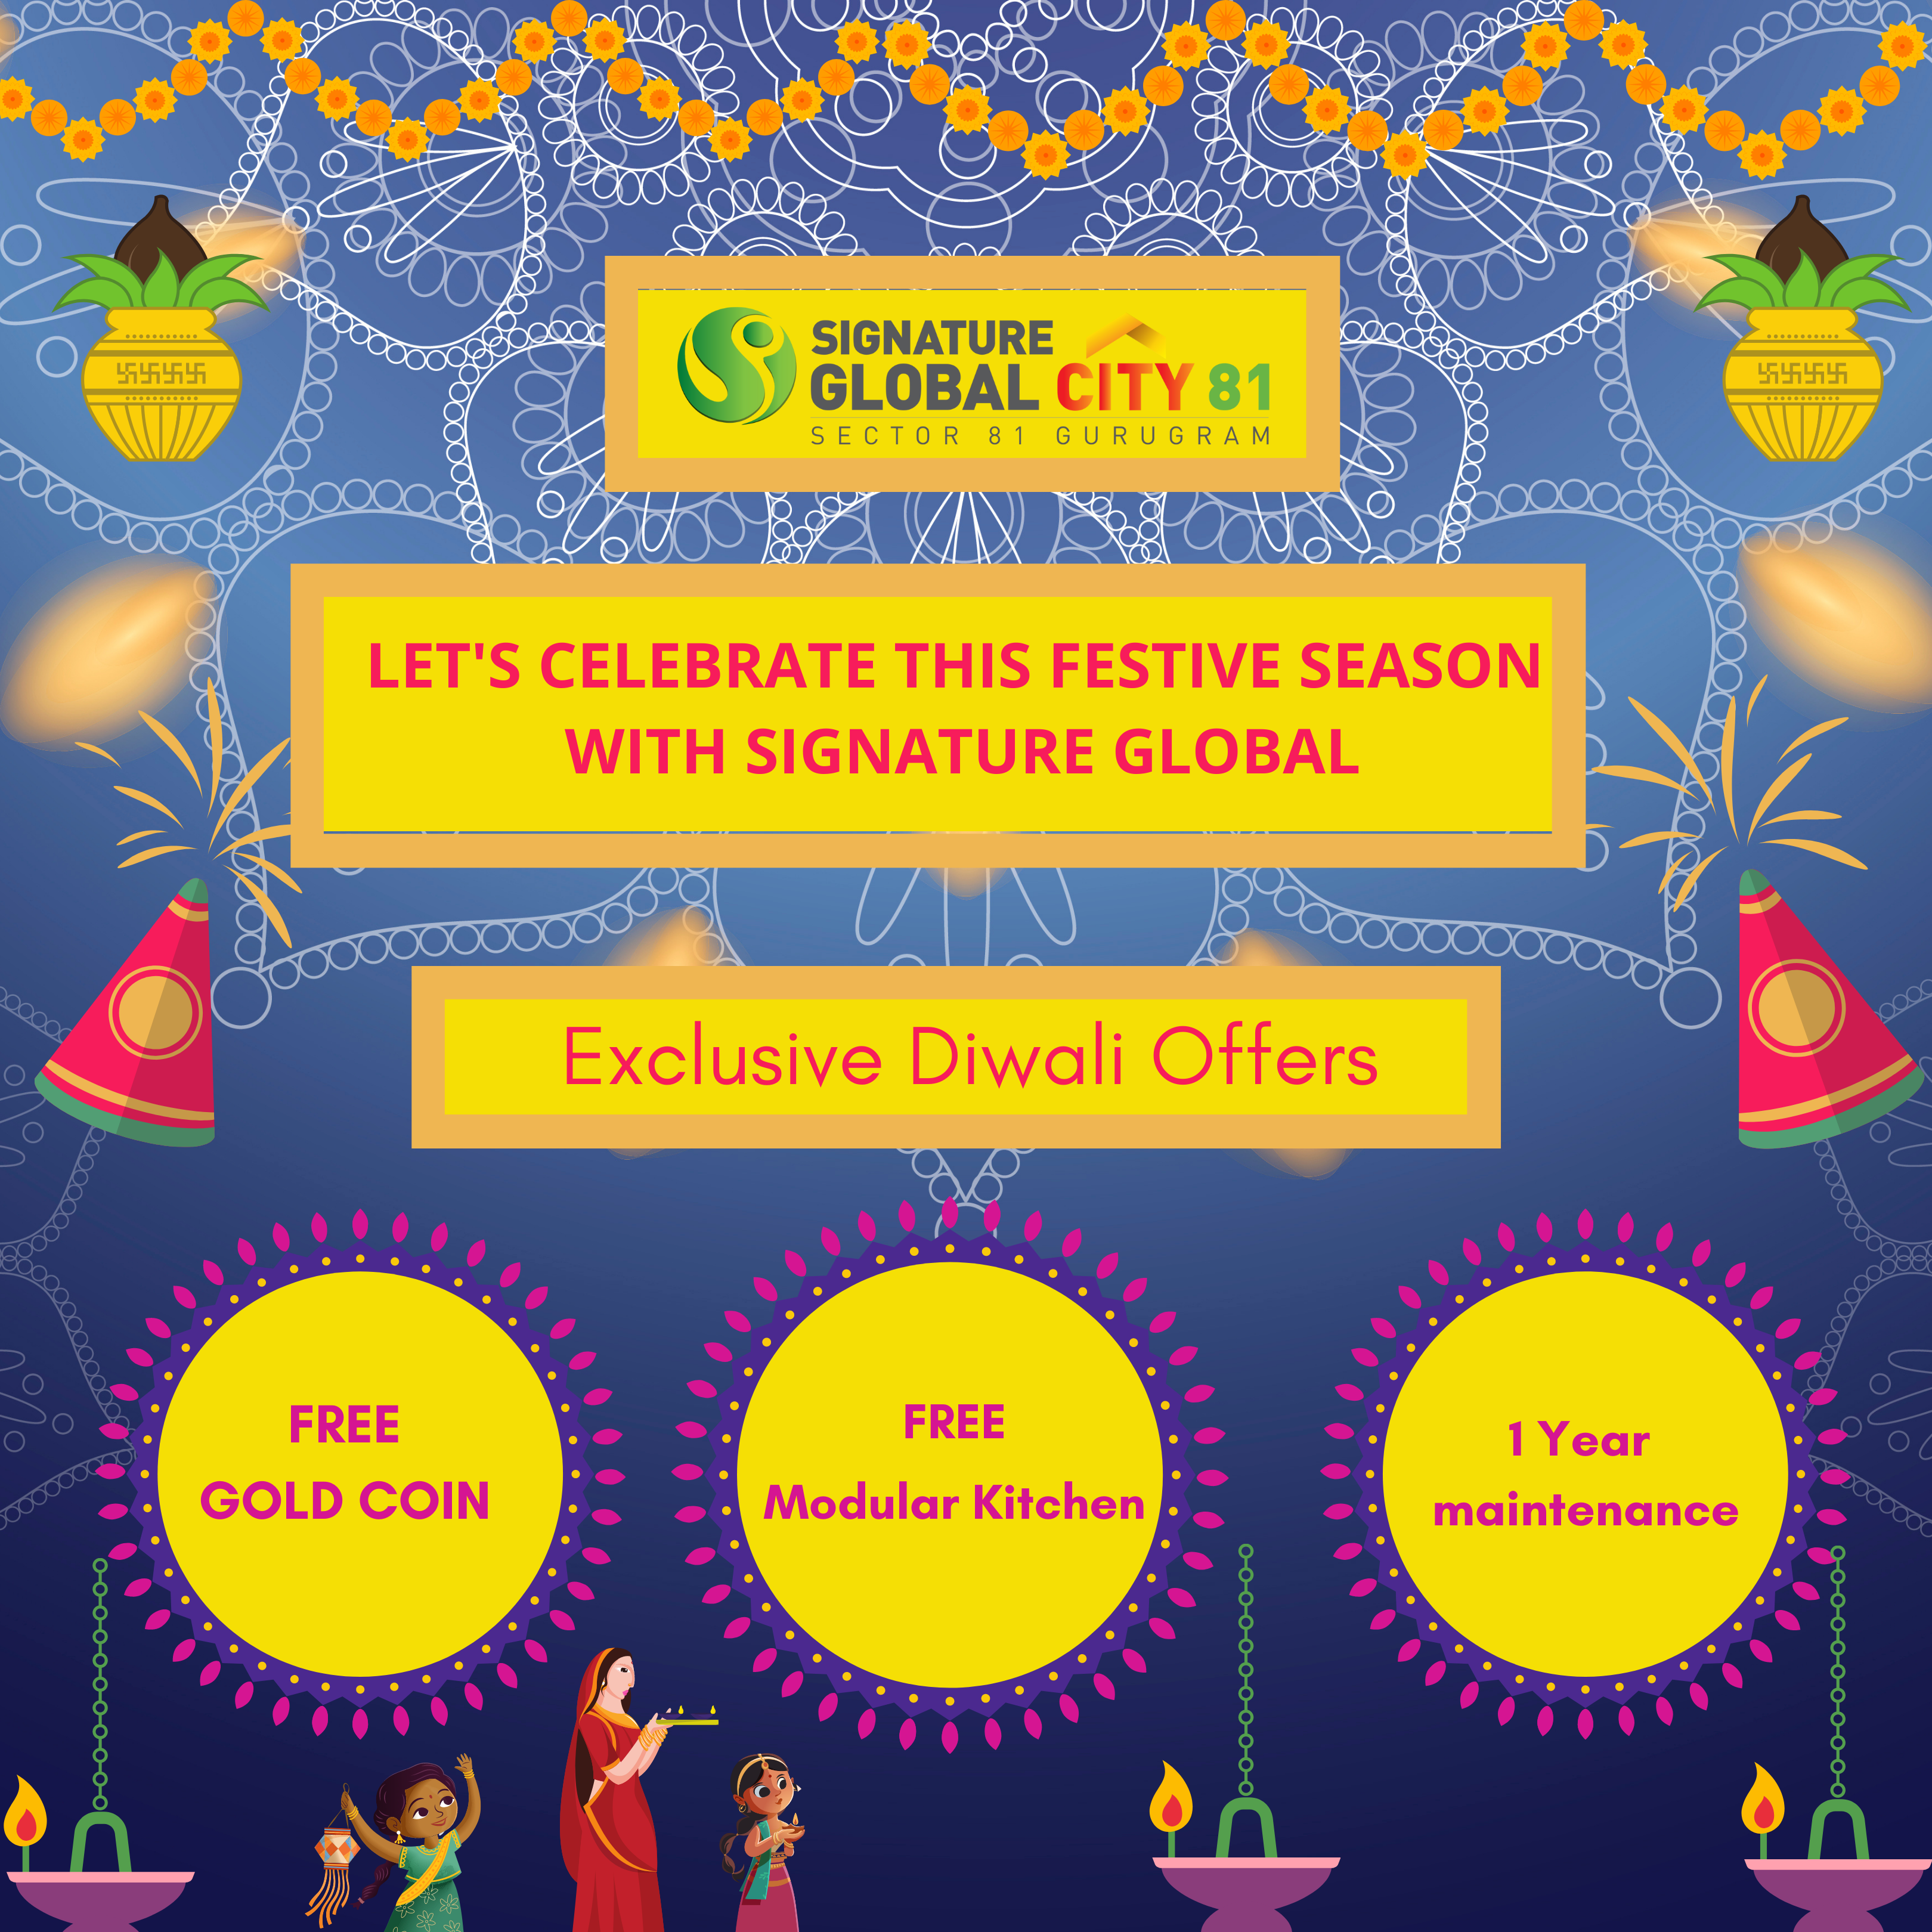 Lets Celebrate This Diwali Season with Signature Global city 81 with Exclusive Offers